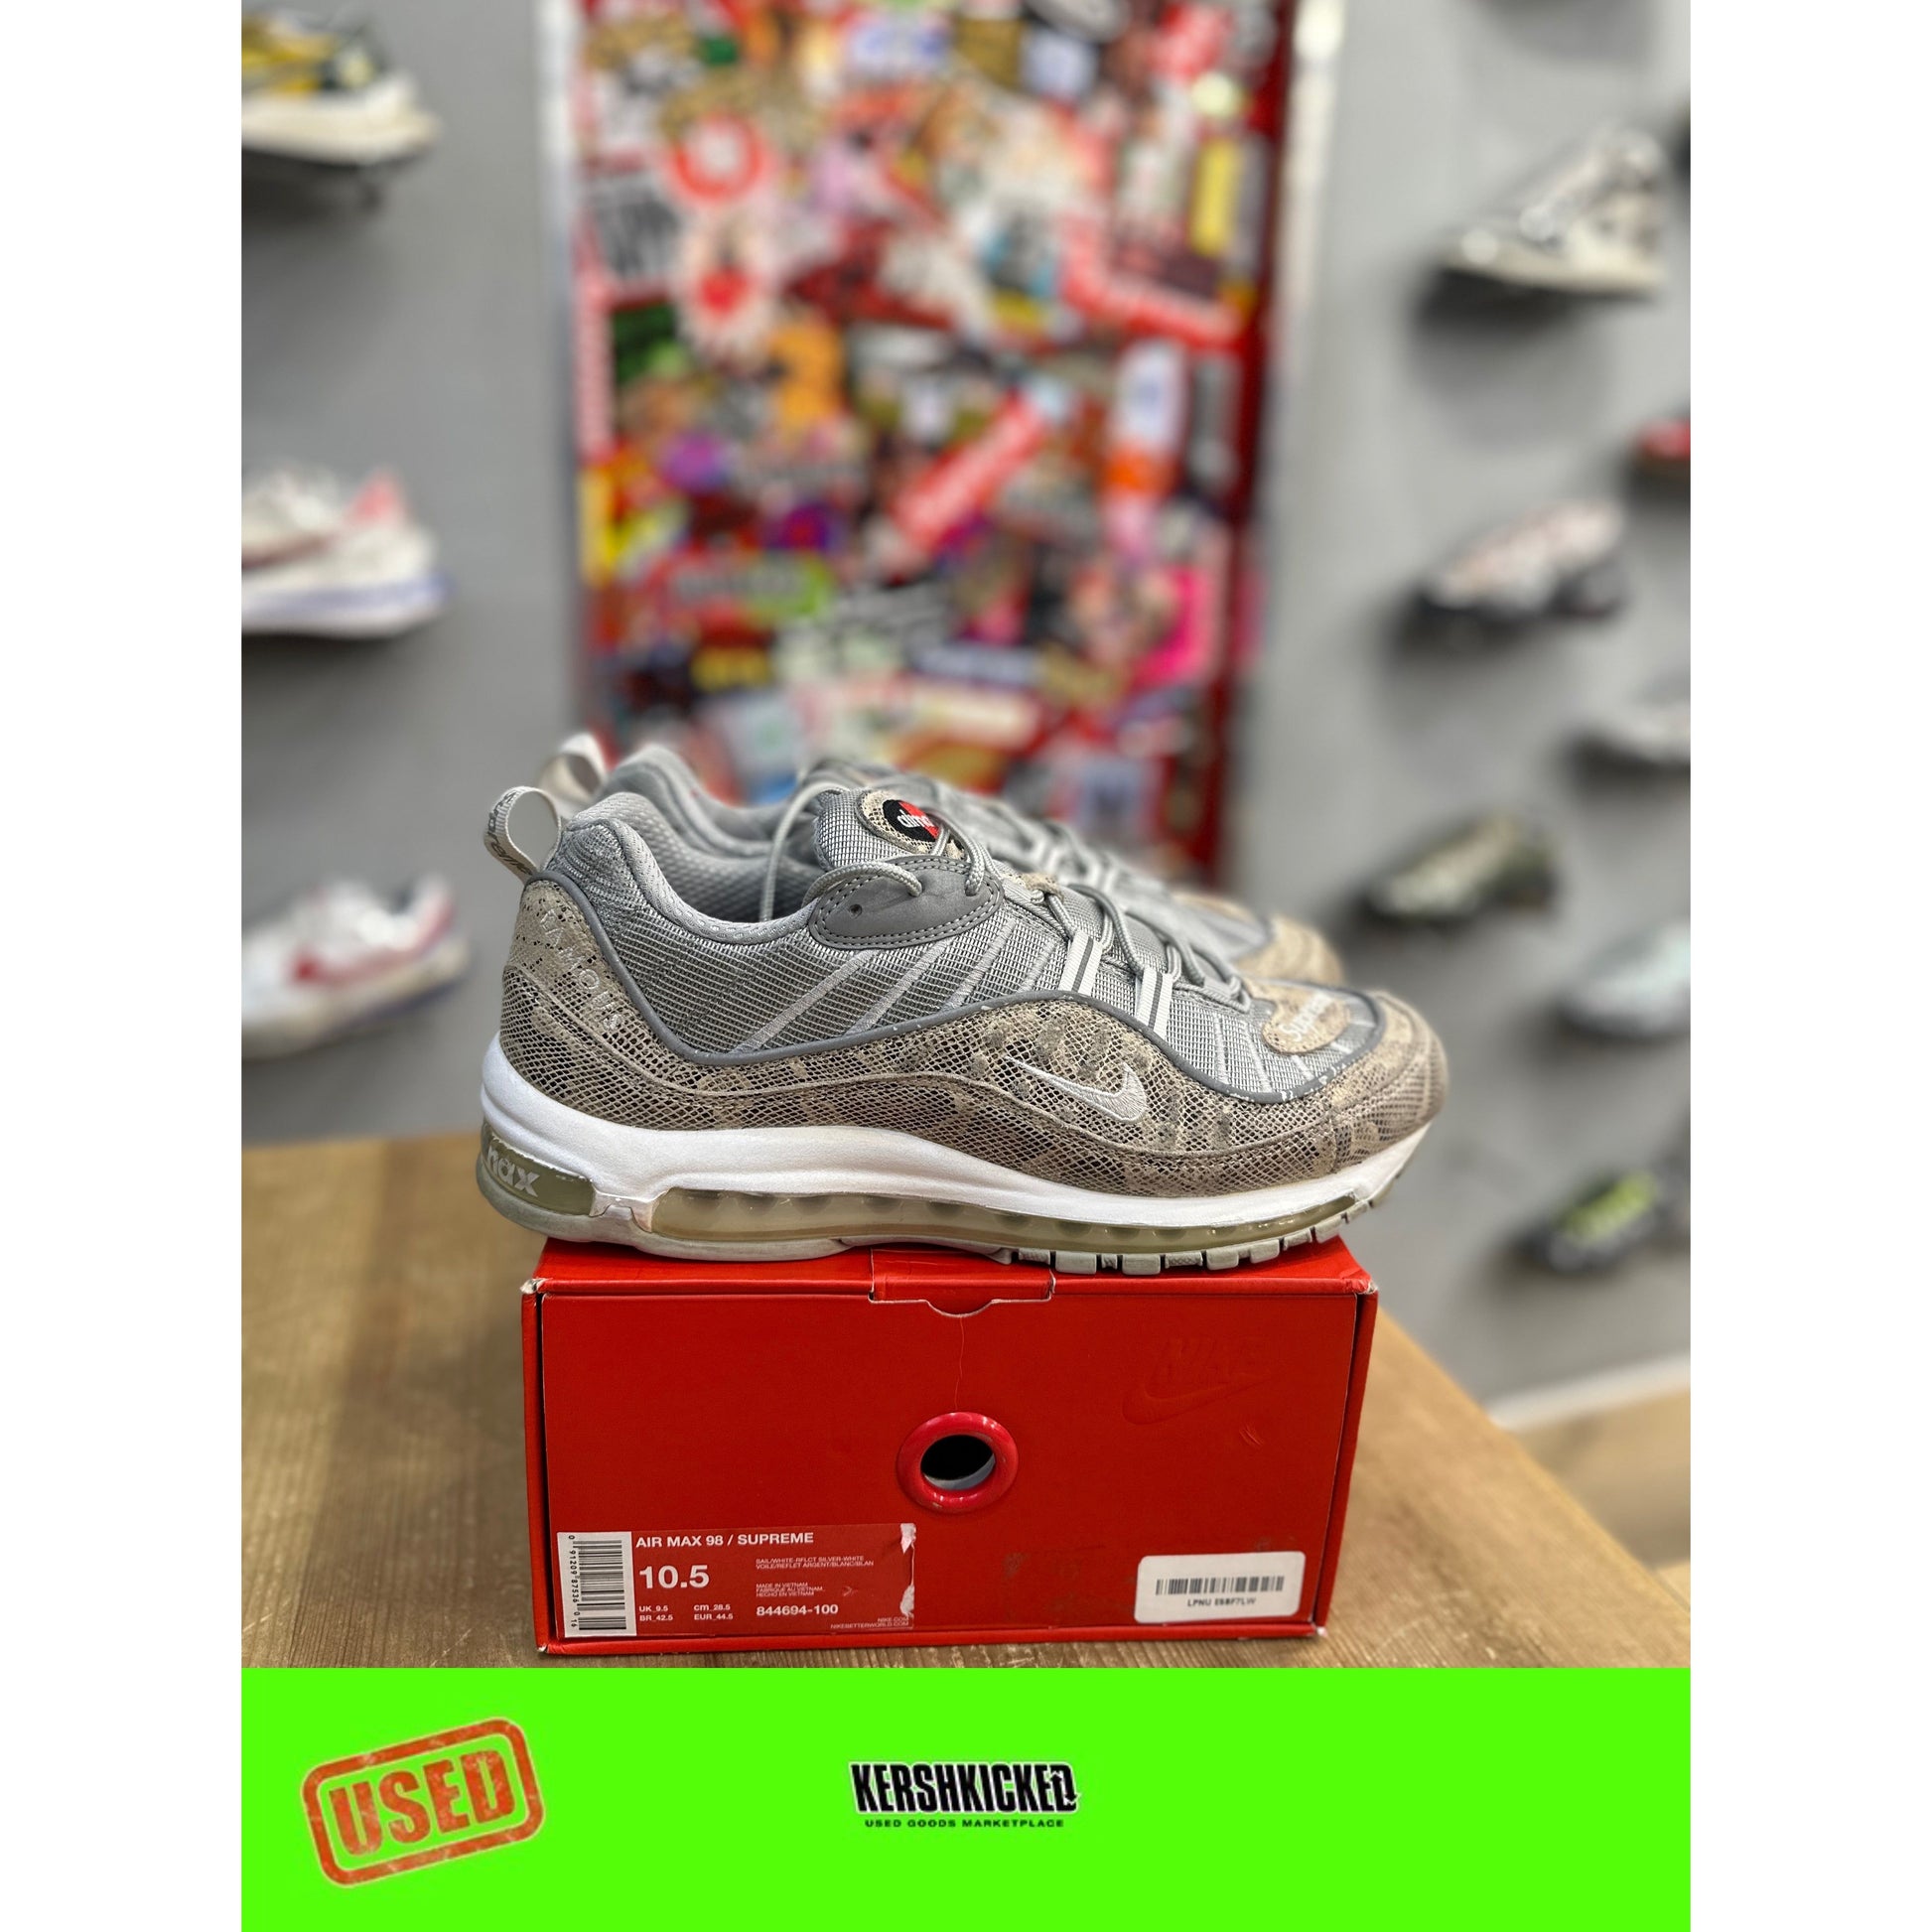 Nike Air Max 98 Supreme Snakeskin UK 9.5 by Nike from £175.00